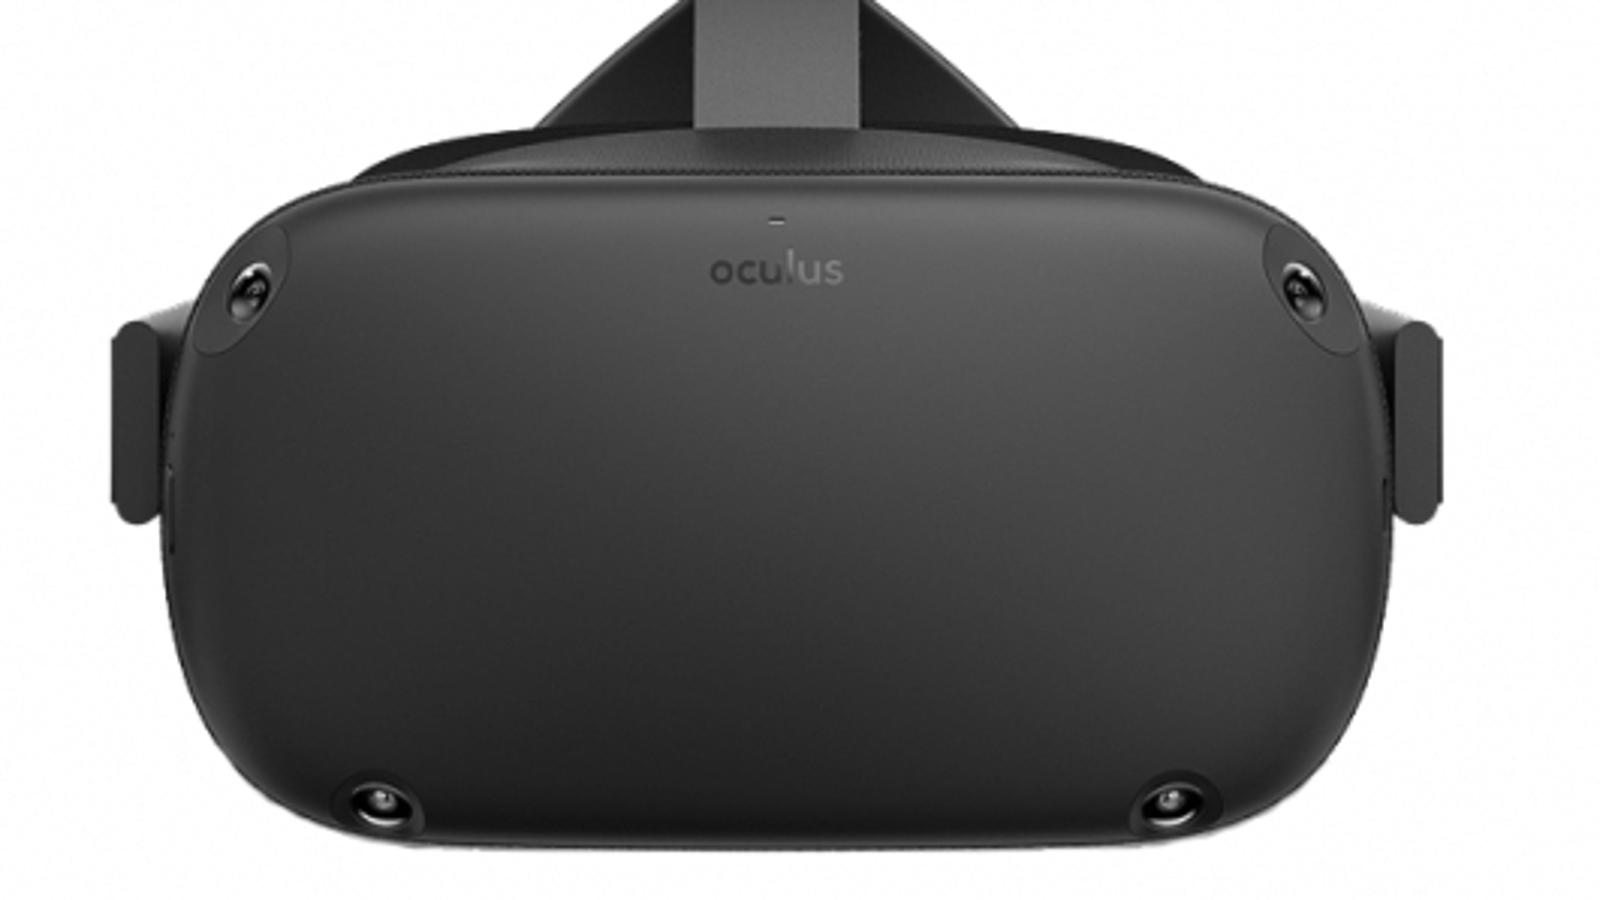  Oculus Rift S PC-Powered VR Gaming Headset : Video Games